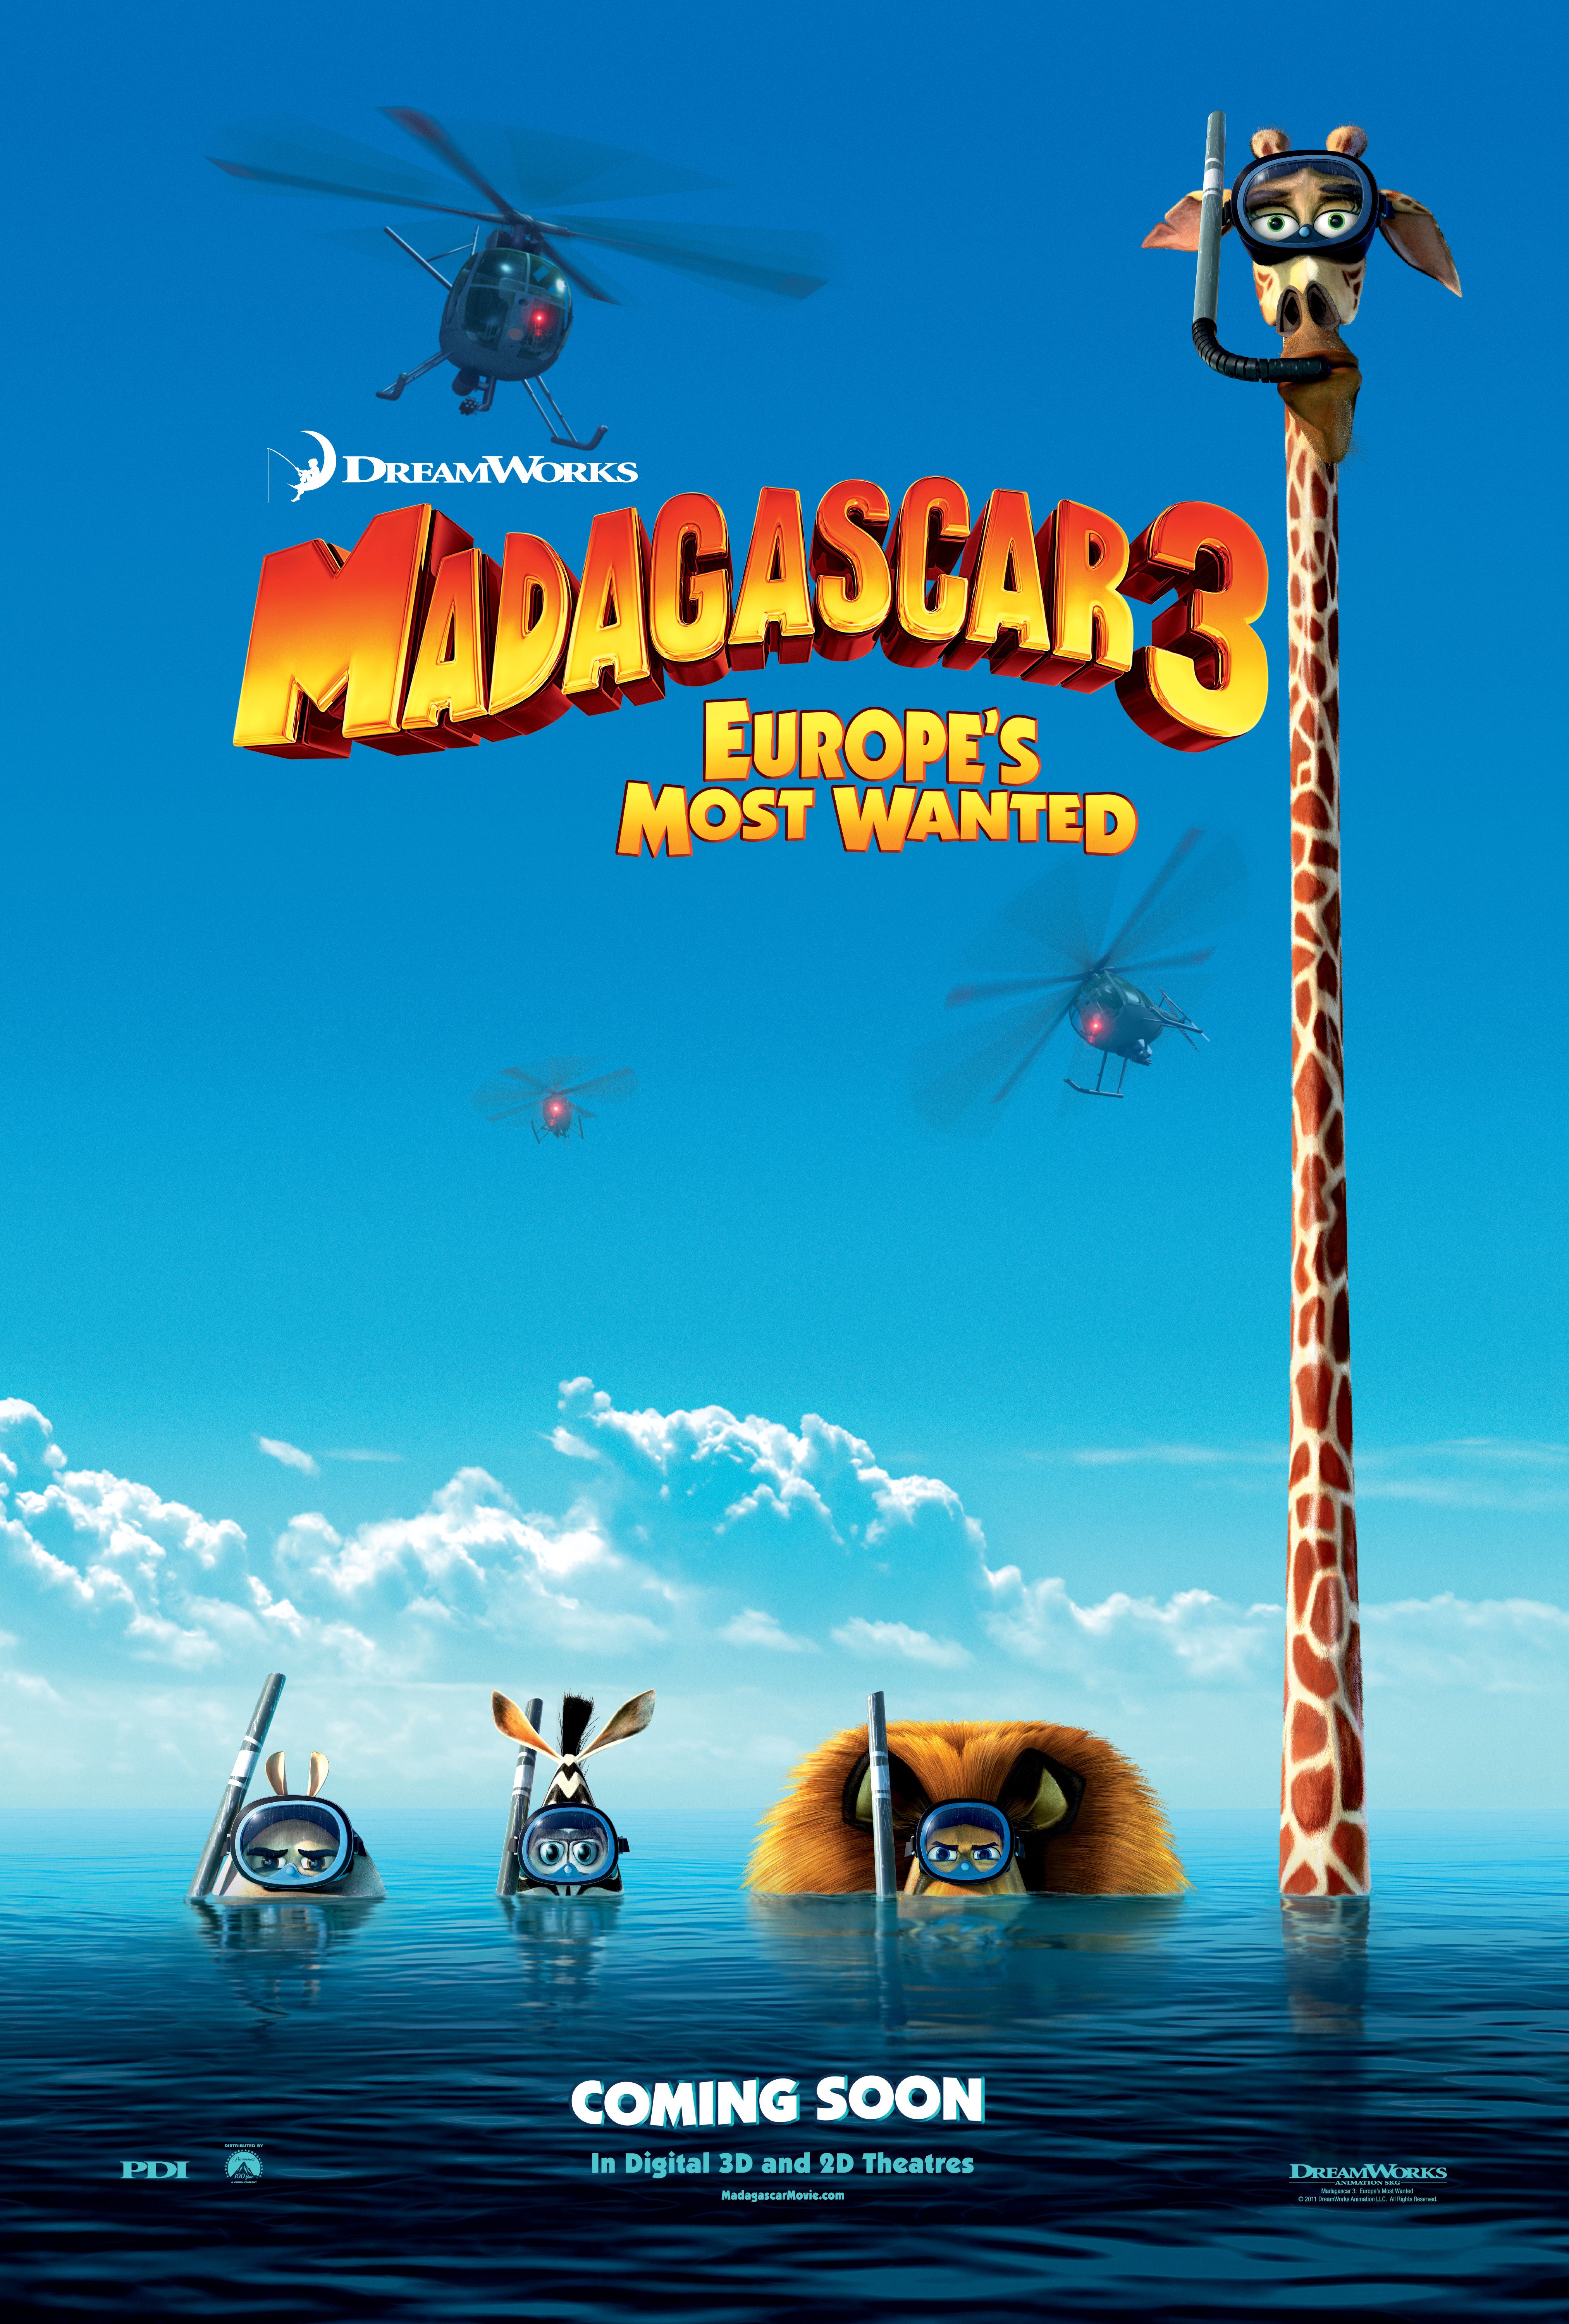 Madagascar 3 Europeâ€™s Most Wanted Poster Wallpaper Image for HTC One M9